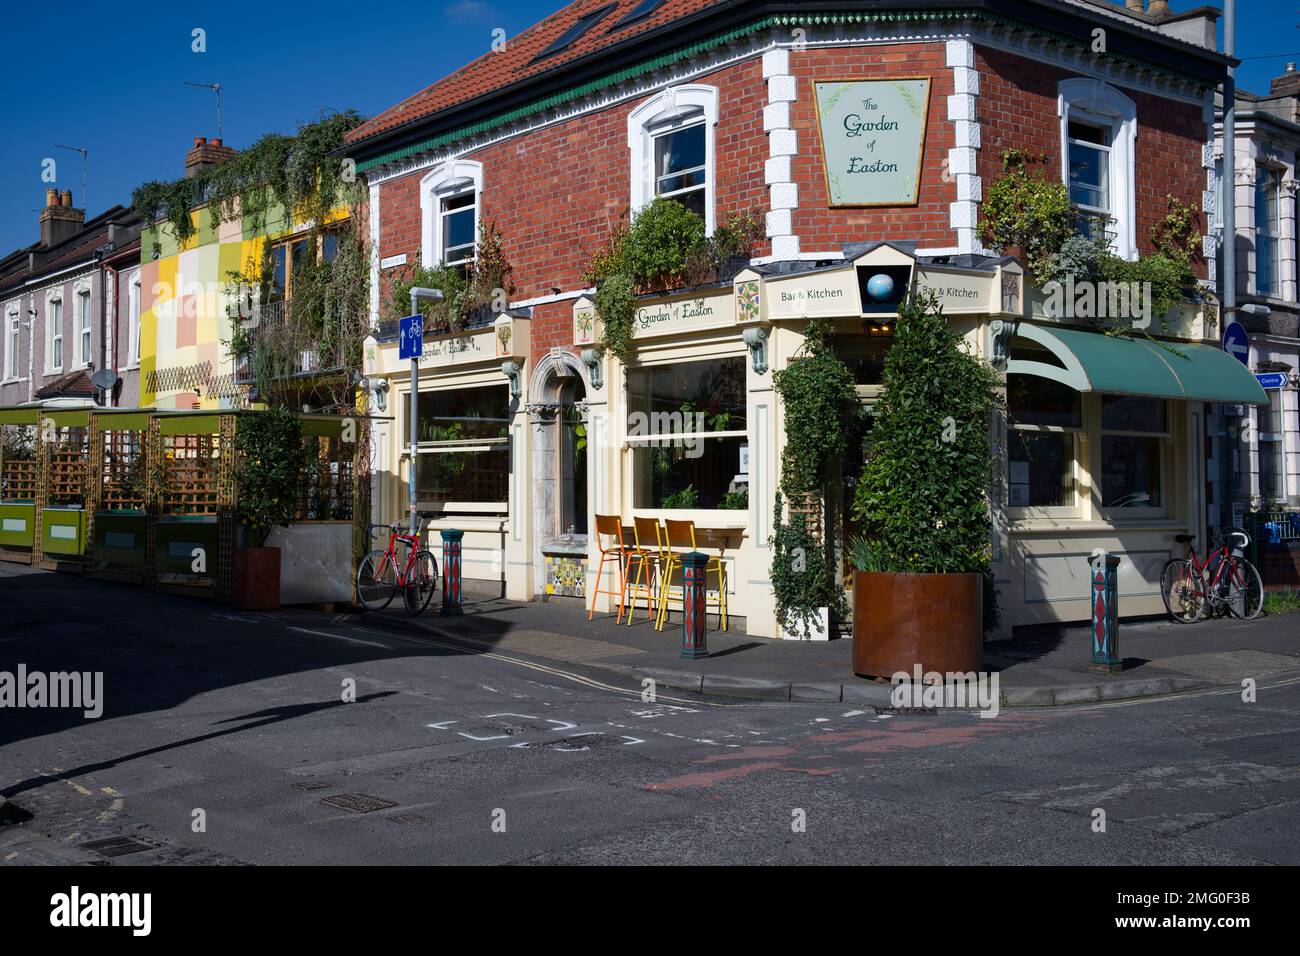 Colourful restaurant called The Garden of Easton just outside Brist City Centre on St Marks road. Stock Photo